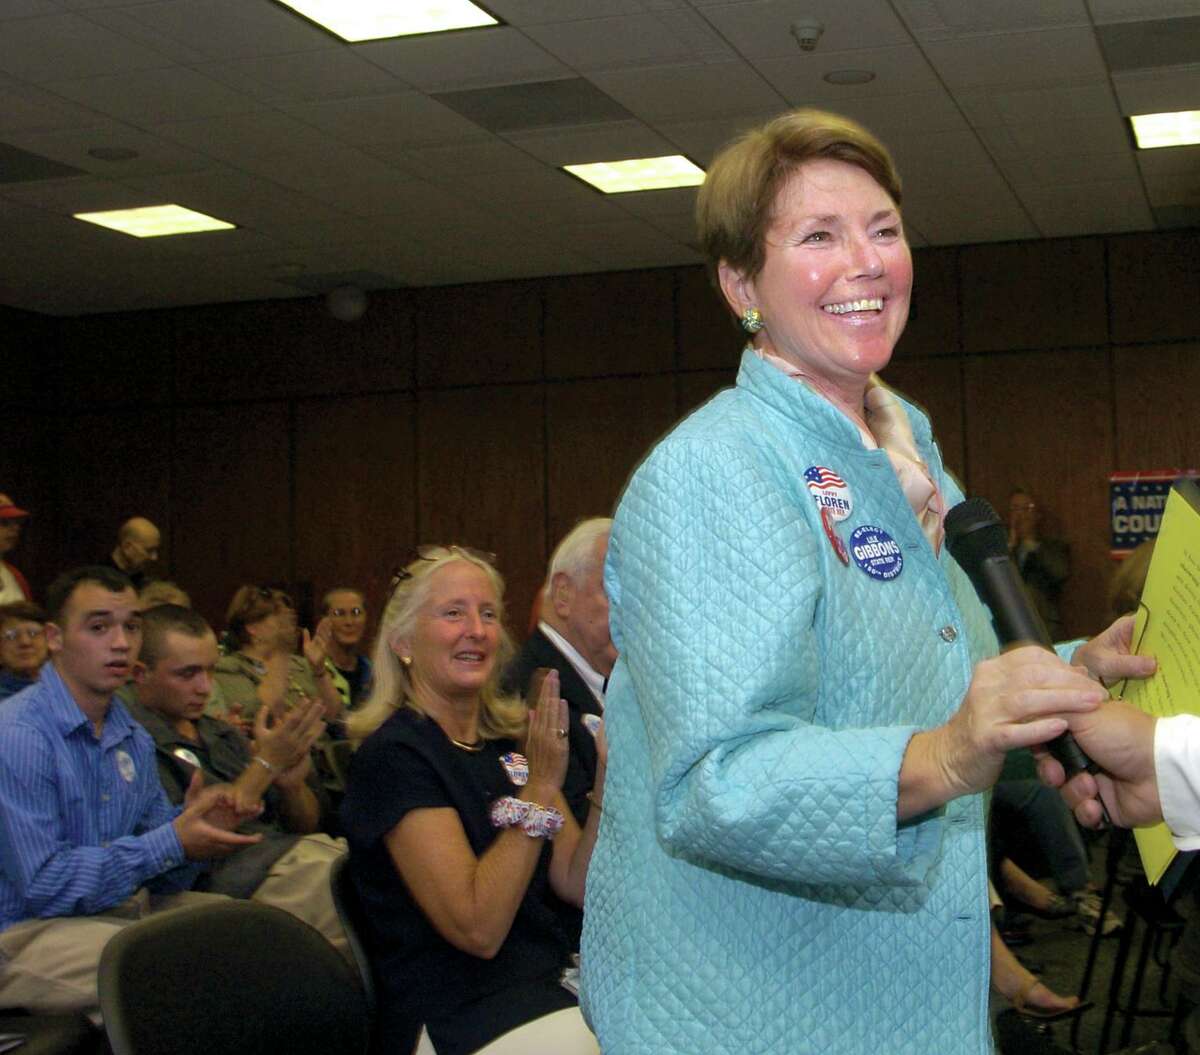 Livvy Floren gets a round of applause as she is introduced to the crowd gathered for the the Republican Town Committee campaign kickoff at Greenwich Town Hall in 2004